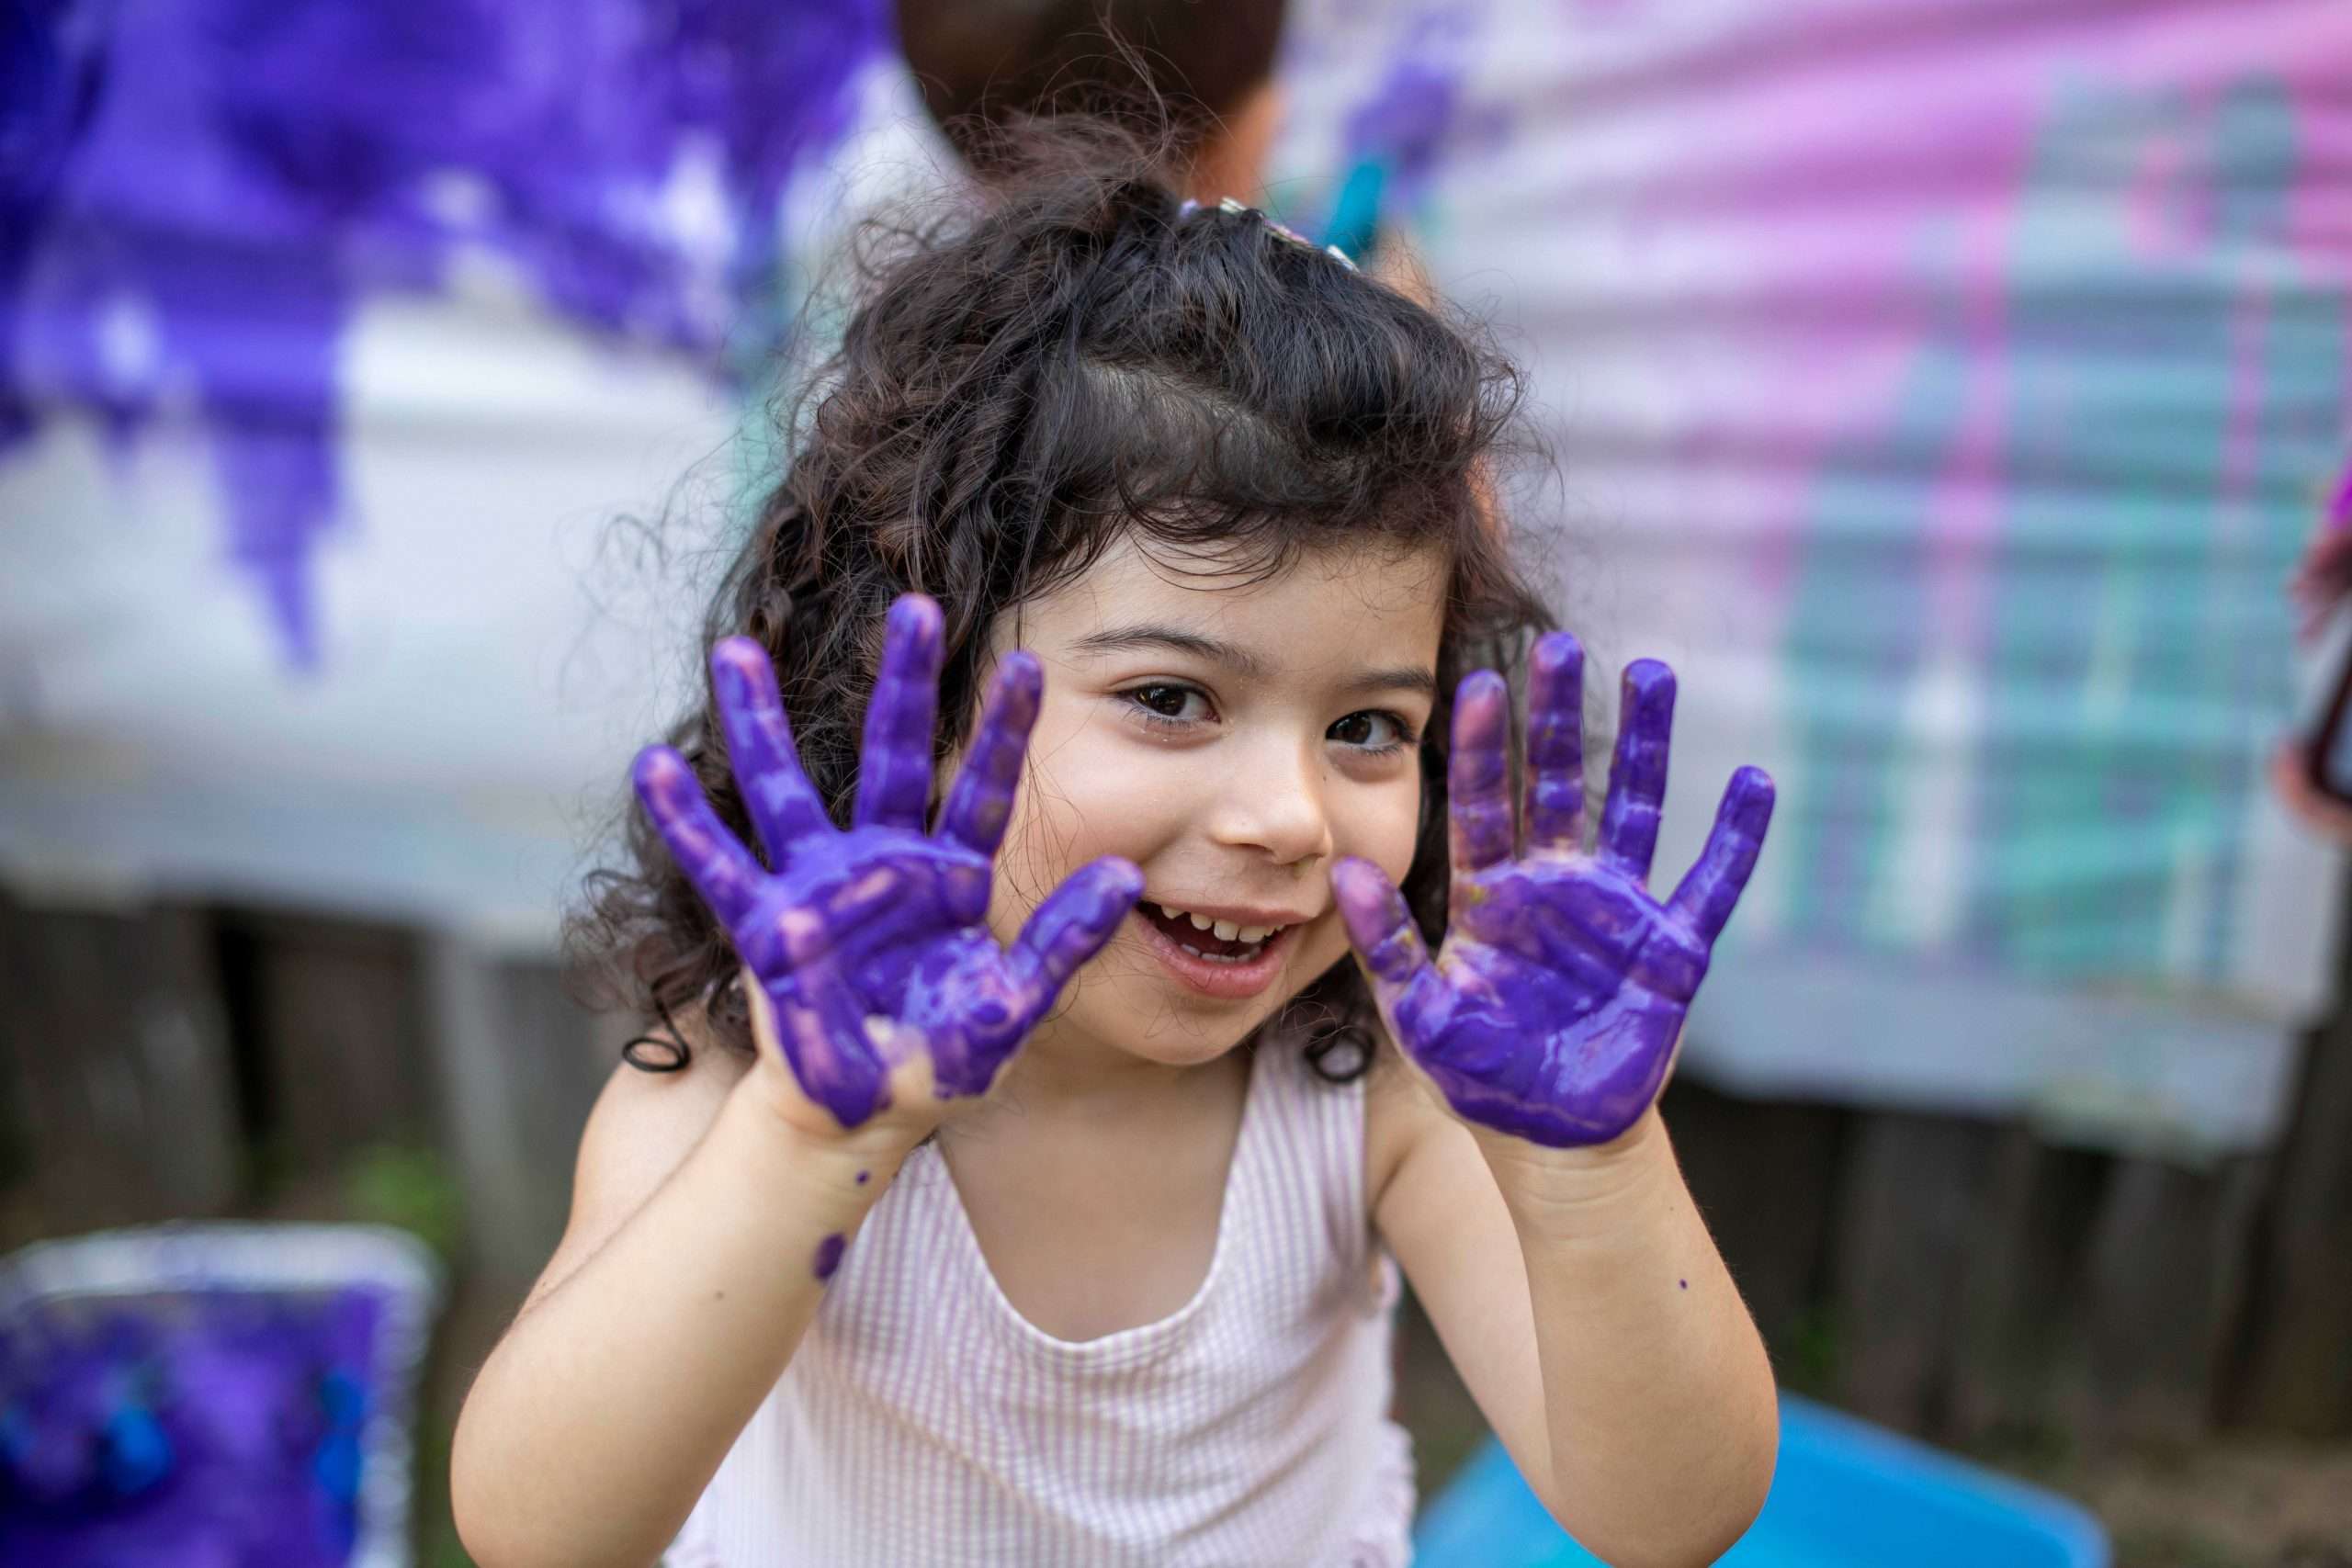 Child smiling in front of finger painted canvas. Child is showing both of their hands which are covered in purple paint.